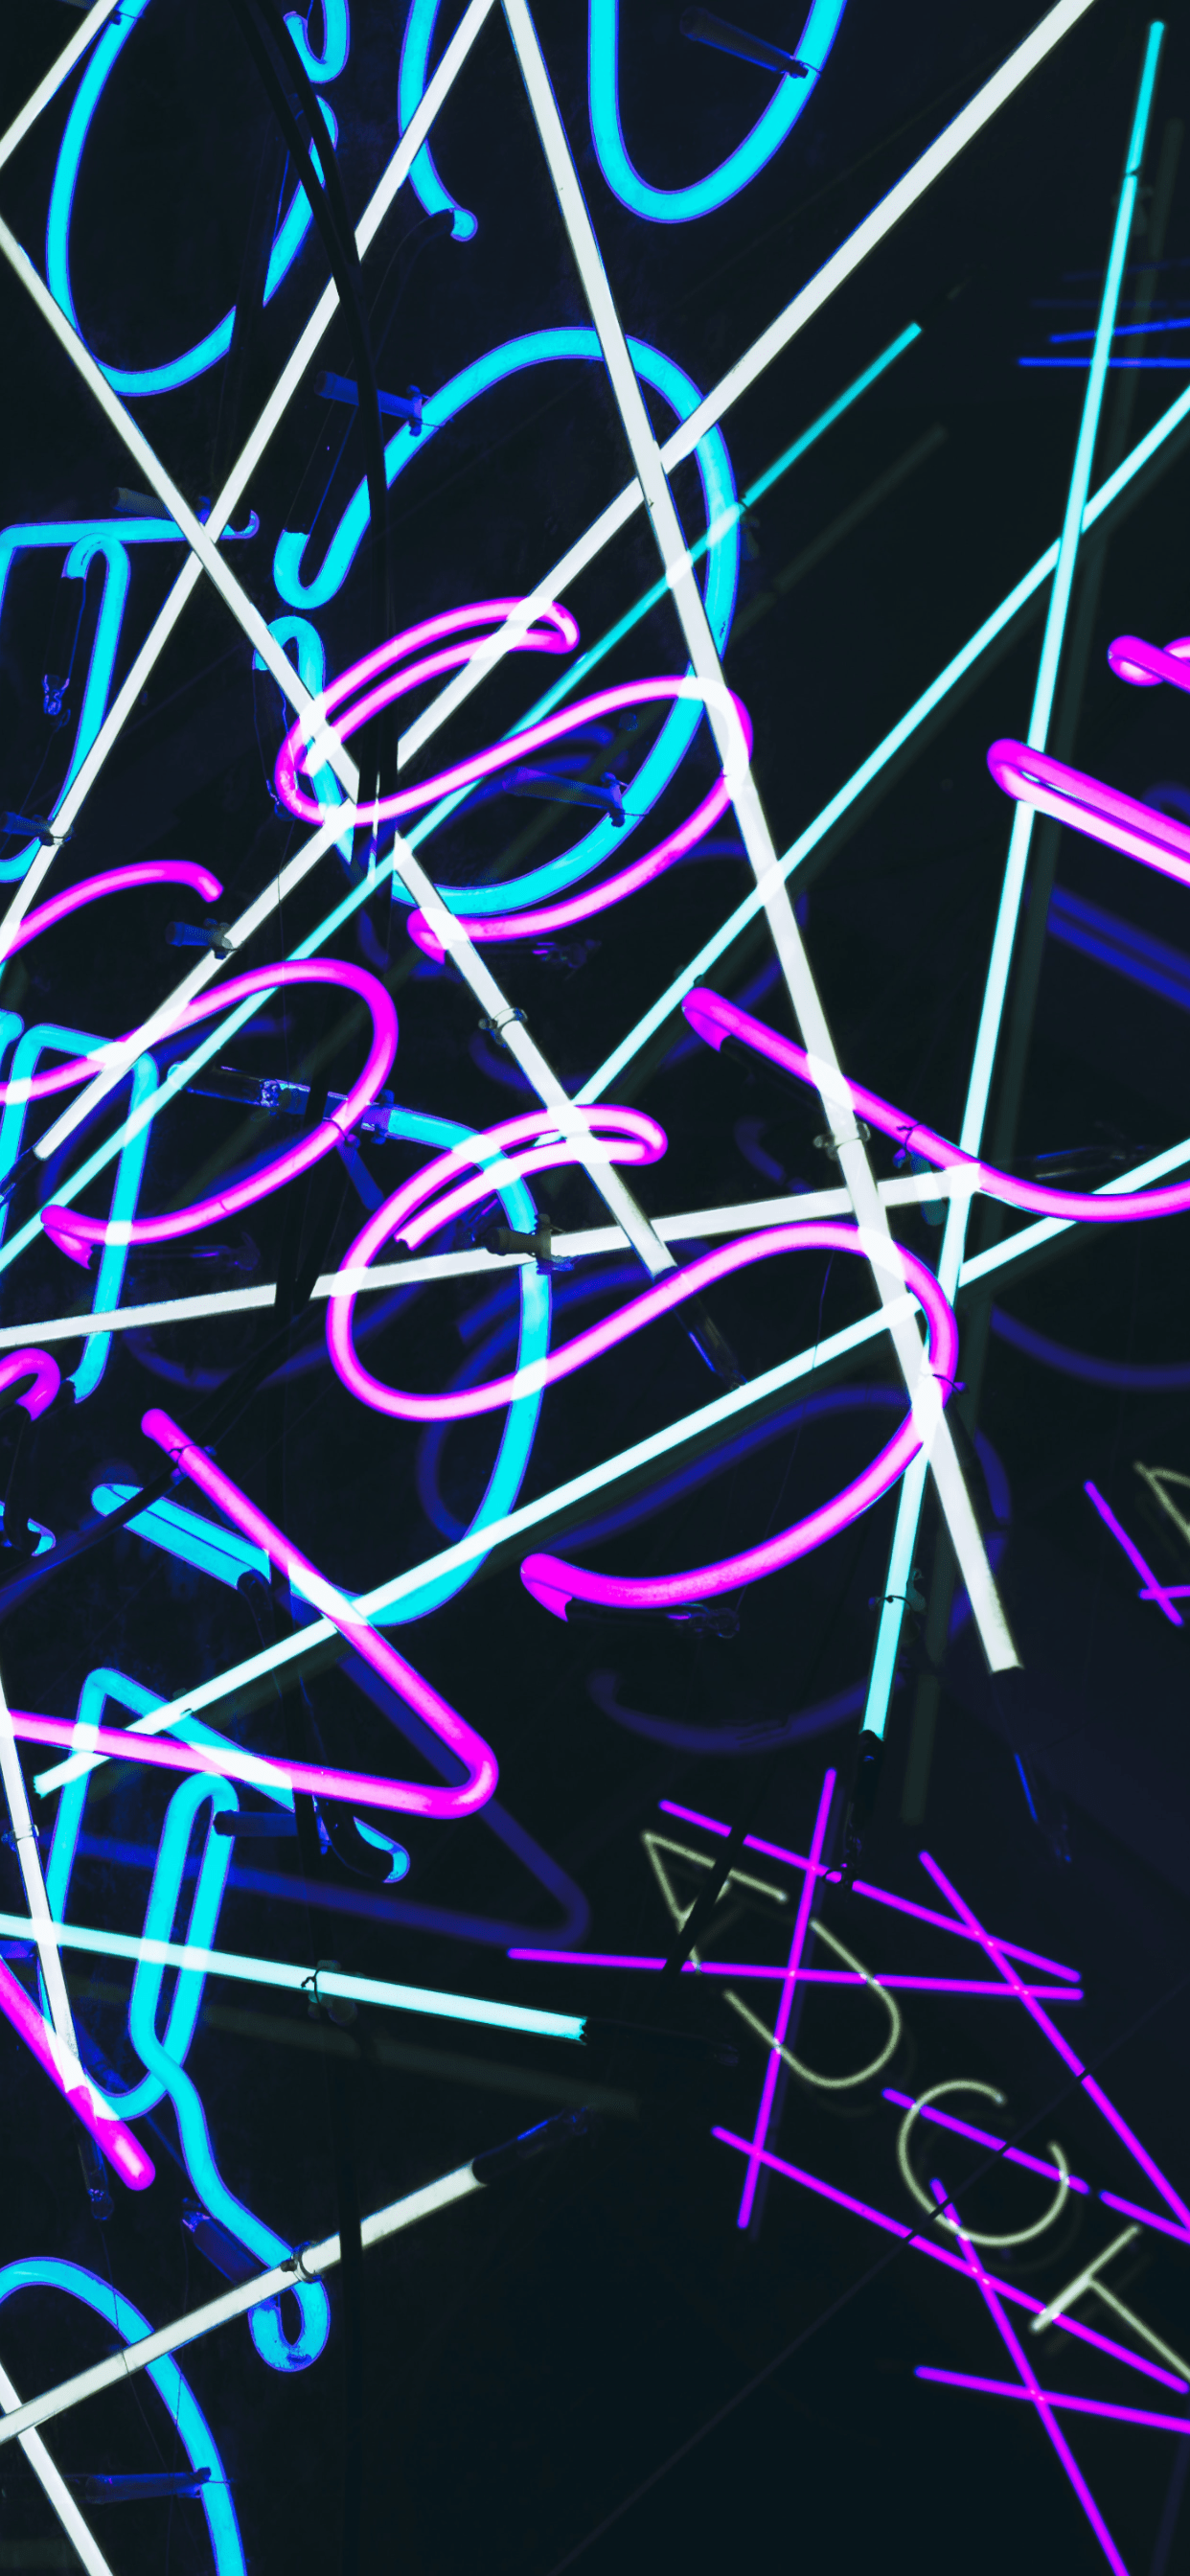 Neon Wallpaper for iPhone Pro Max, X, 6